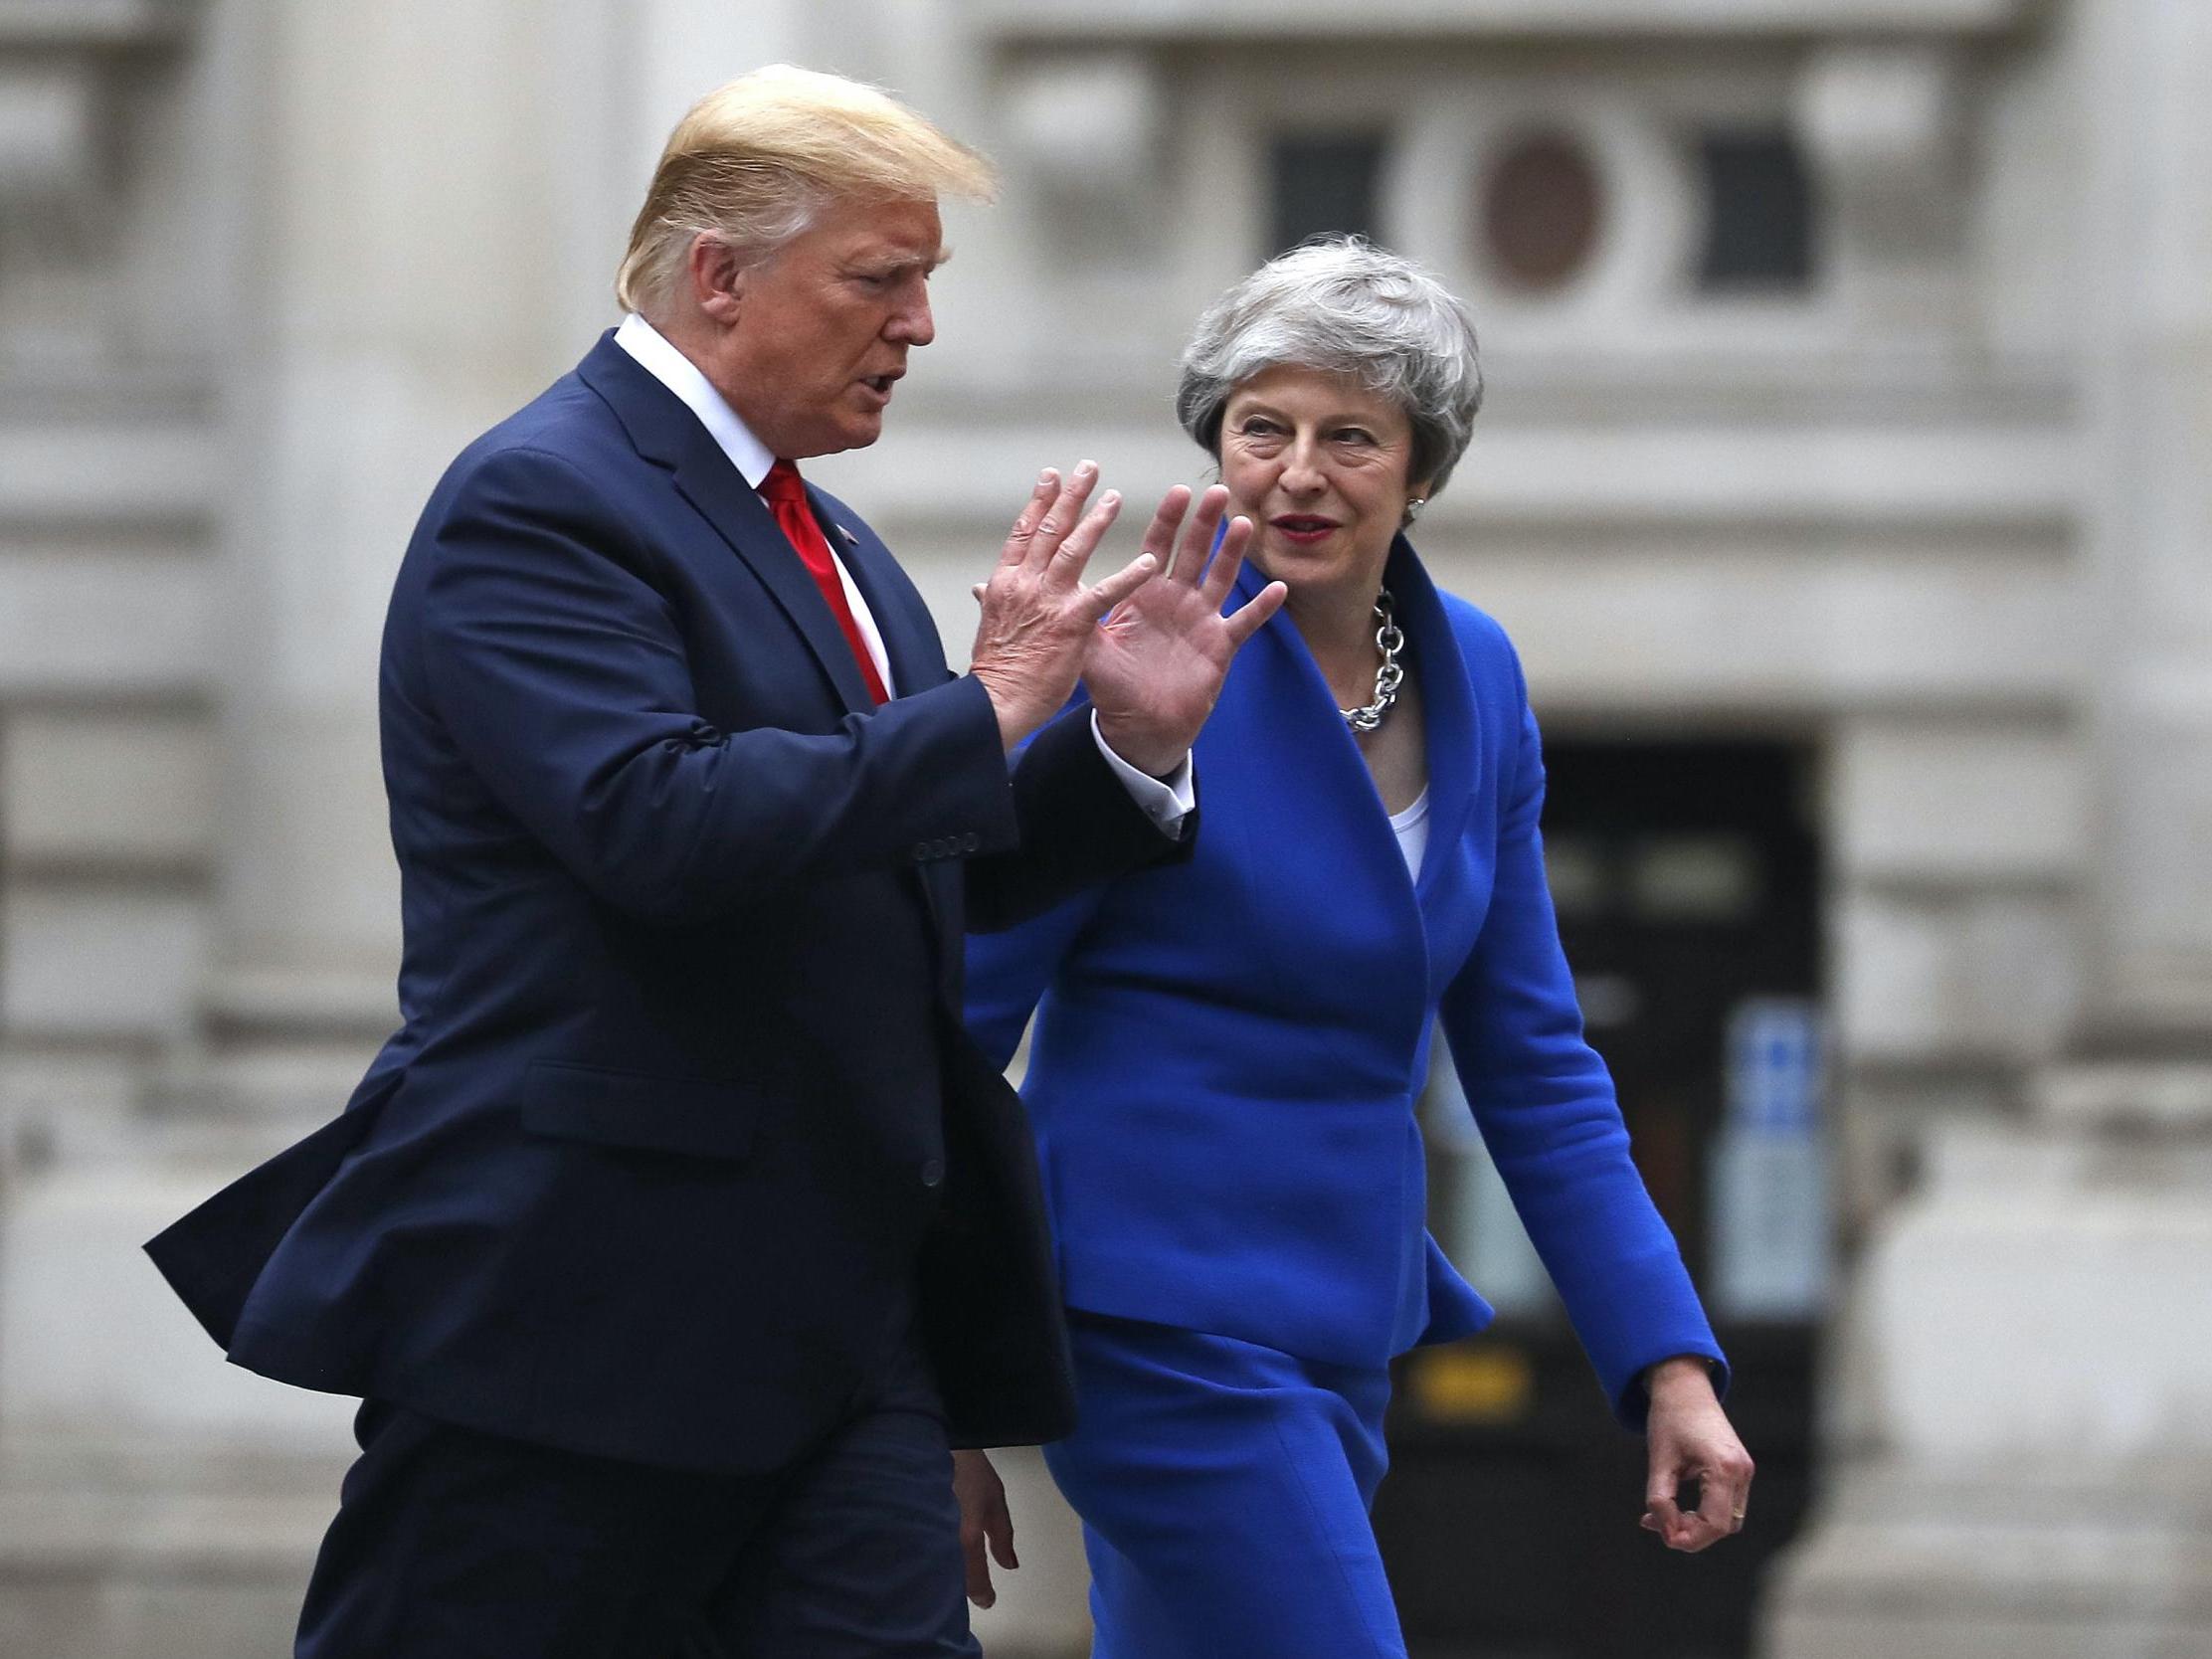 Donald Trump 'bullied and got nasty' with Theresa May during phone calls, officials claim